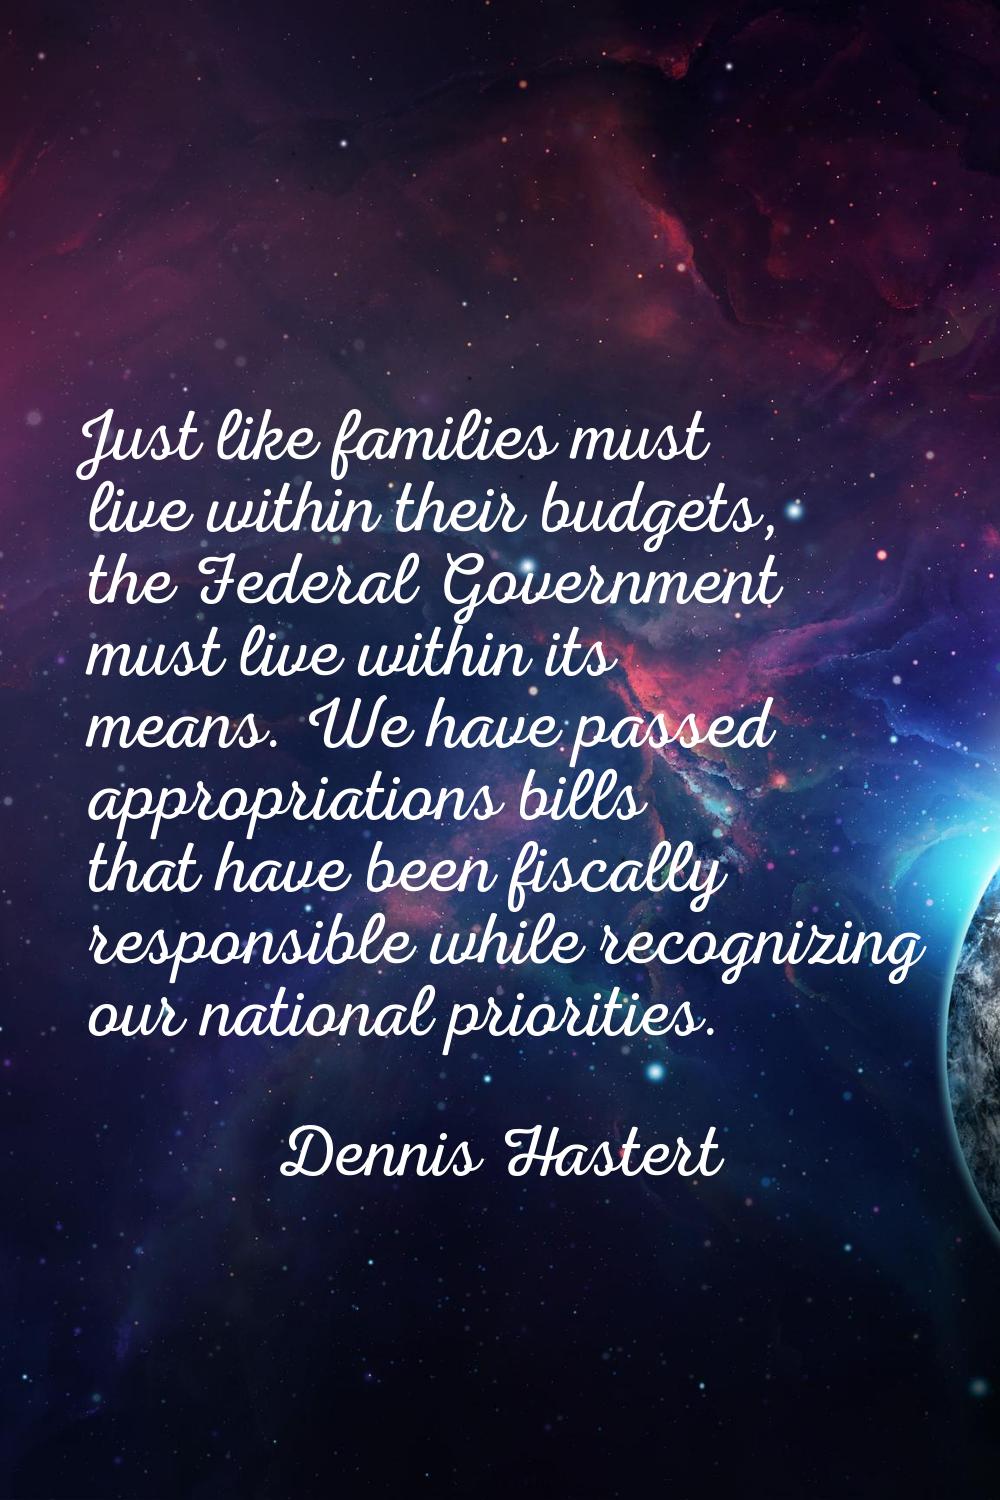 Just like families must live within their budgets, the Federal Government must live within its mean